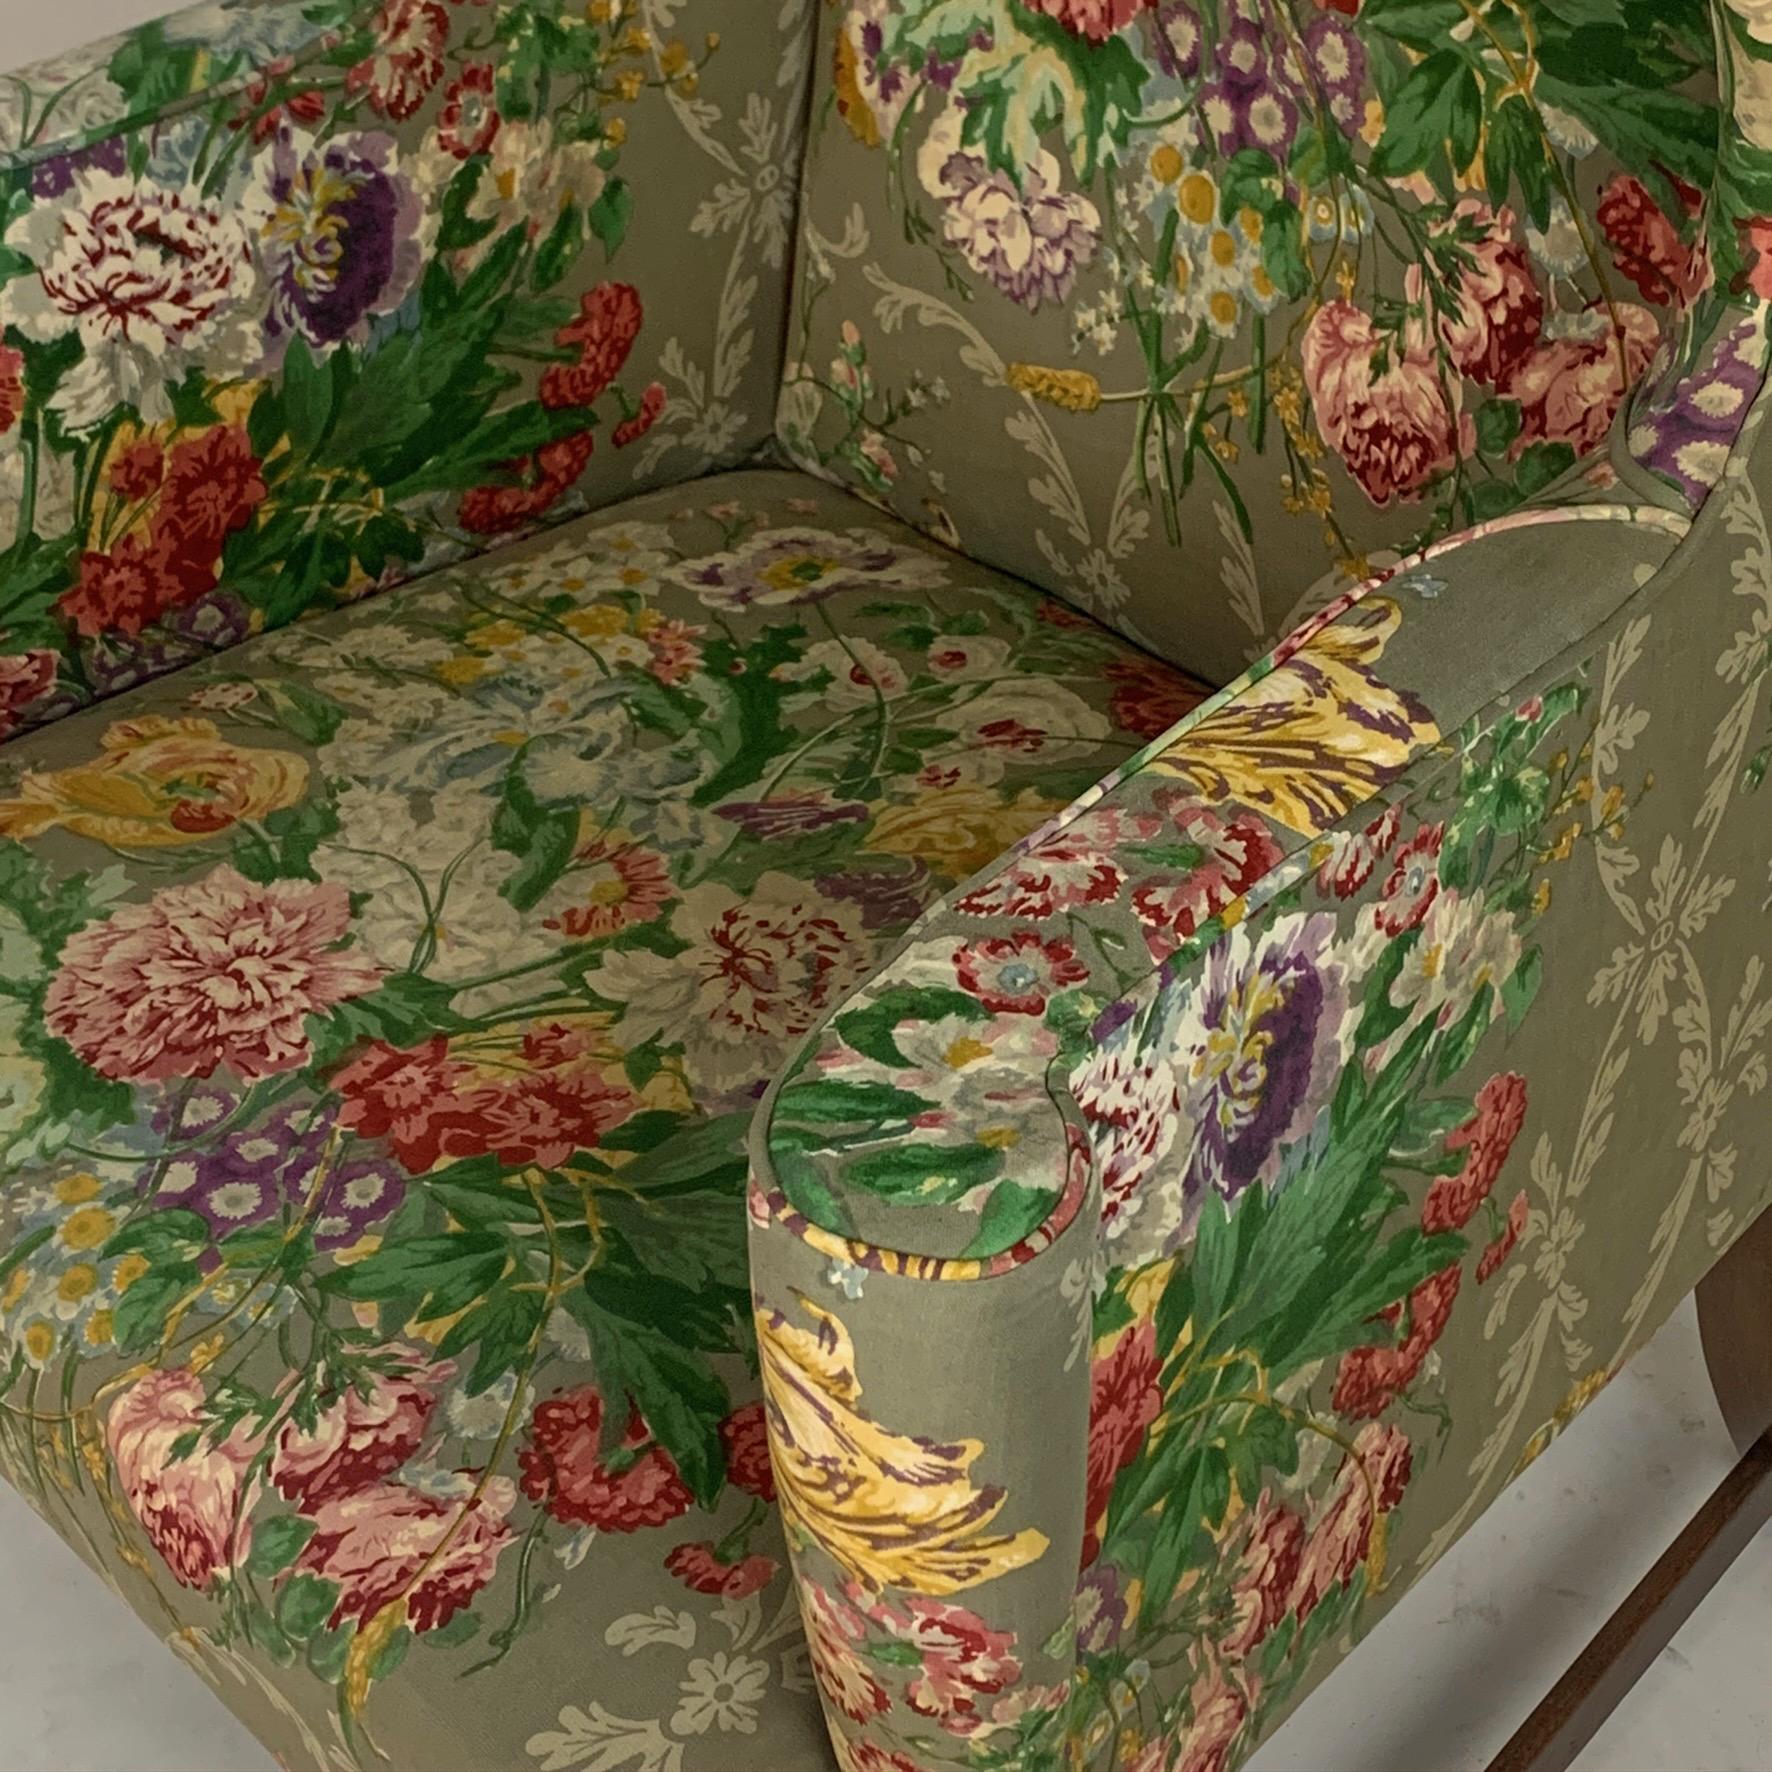 Exceptional Early American Wingback Chairs with Stunning Floral Upholstery 8